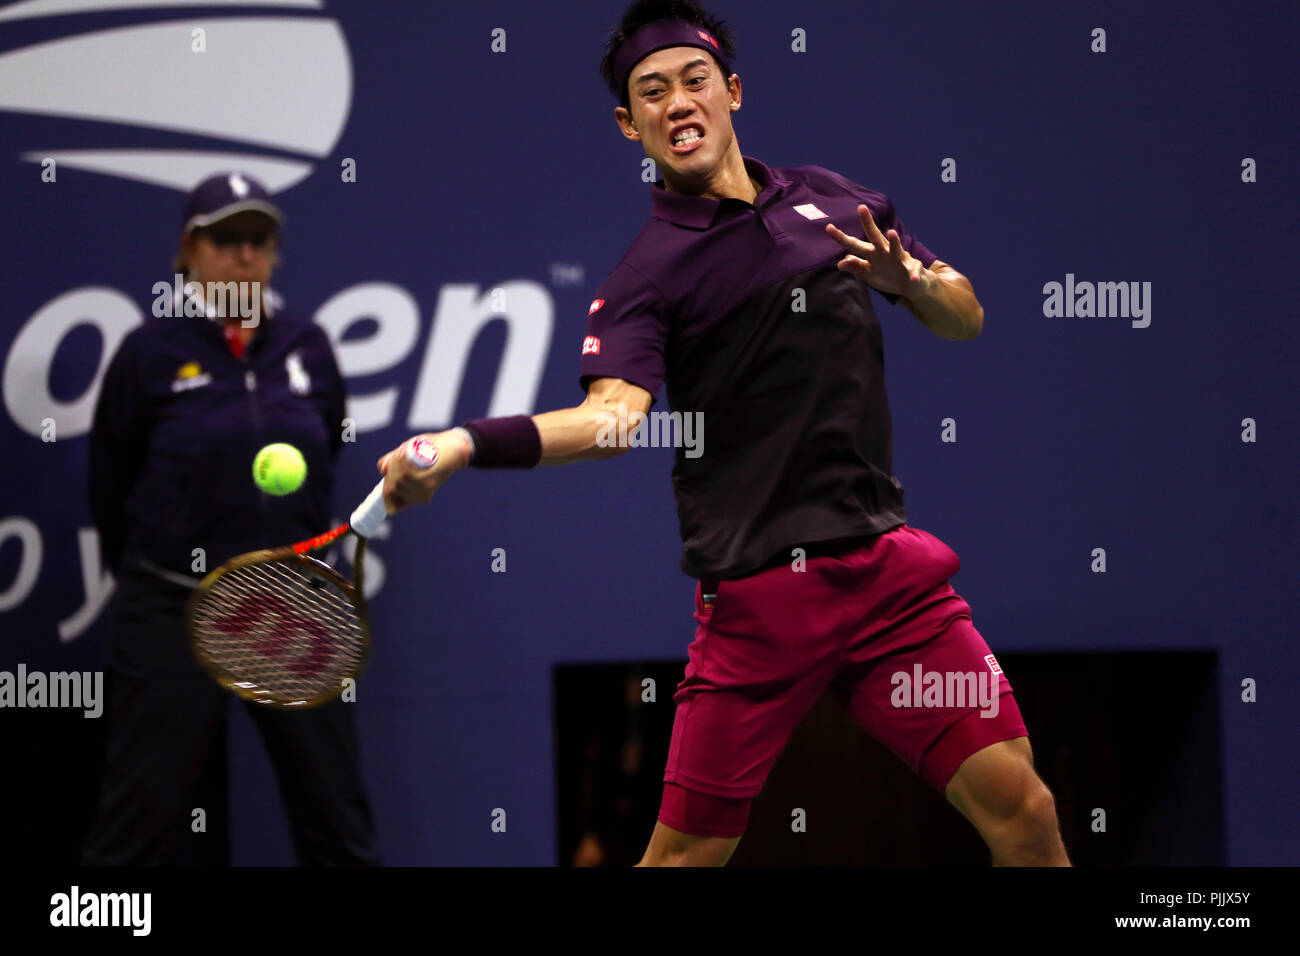 New York, USA. 7th September 2018.  US Open Tennis:  Japan's Kei Nishikori in action against Novak Djokovic, during their semifinal match at the US Open in Flushing Meadows, New York. Djokovic won the match and will face Juan Martin del Potro of Argentina in Sunday's final. Credit: Adam Stoltman/Alamy Live News Stock Photo